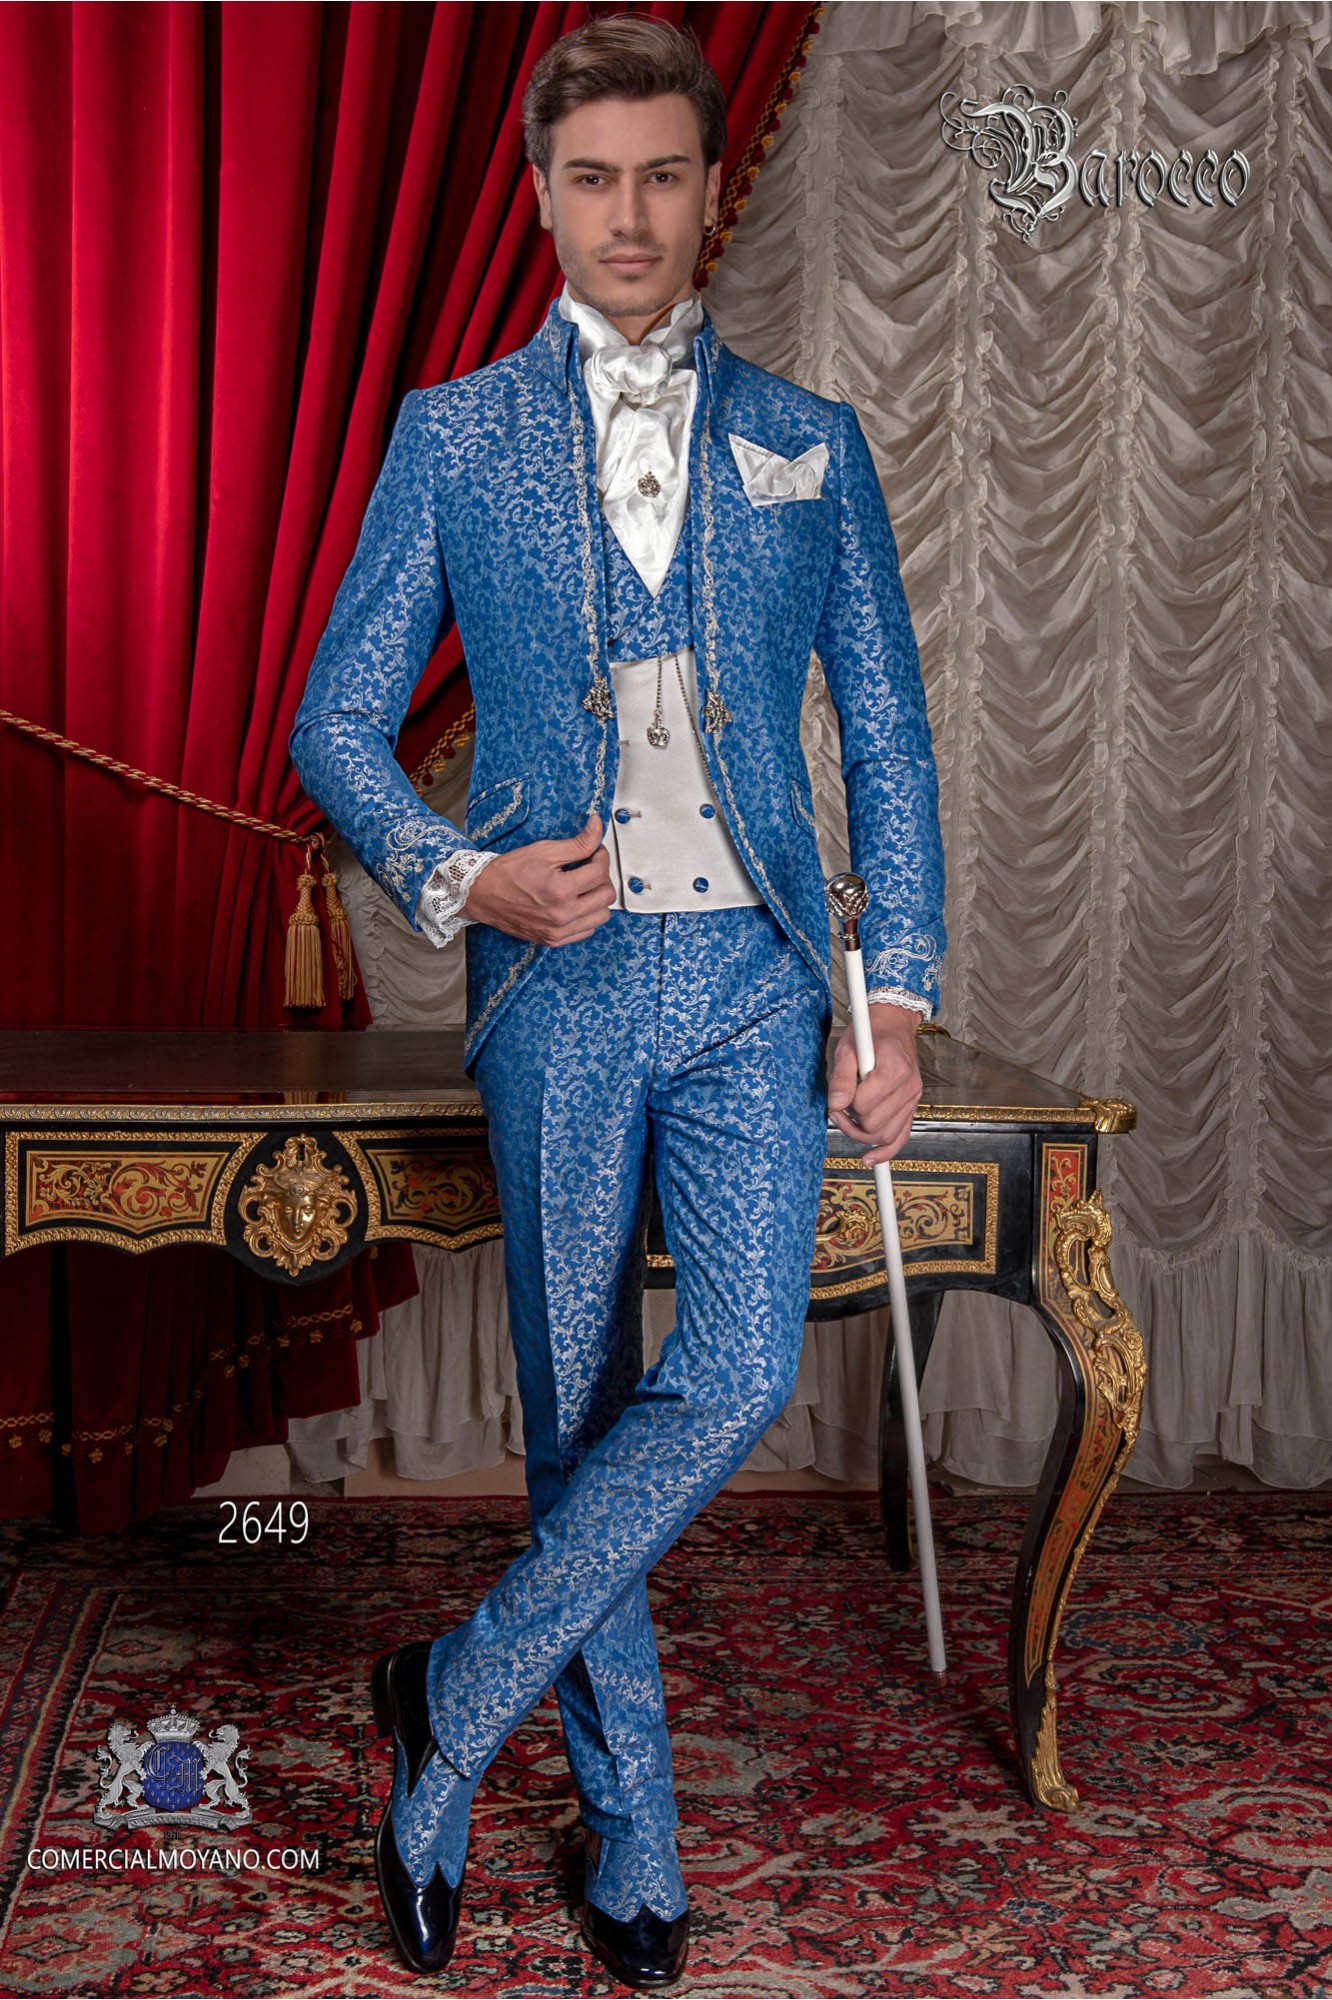 Baroque groom suit, vintage Napoleon collar frock coat in blue and silver jacquard fabric with silver embroidery model 2649 Mario Moyano